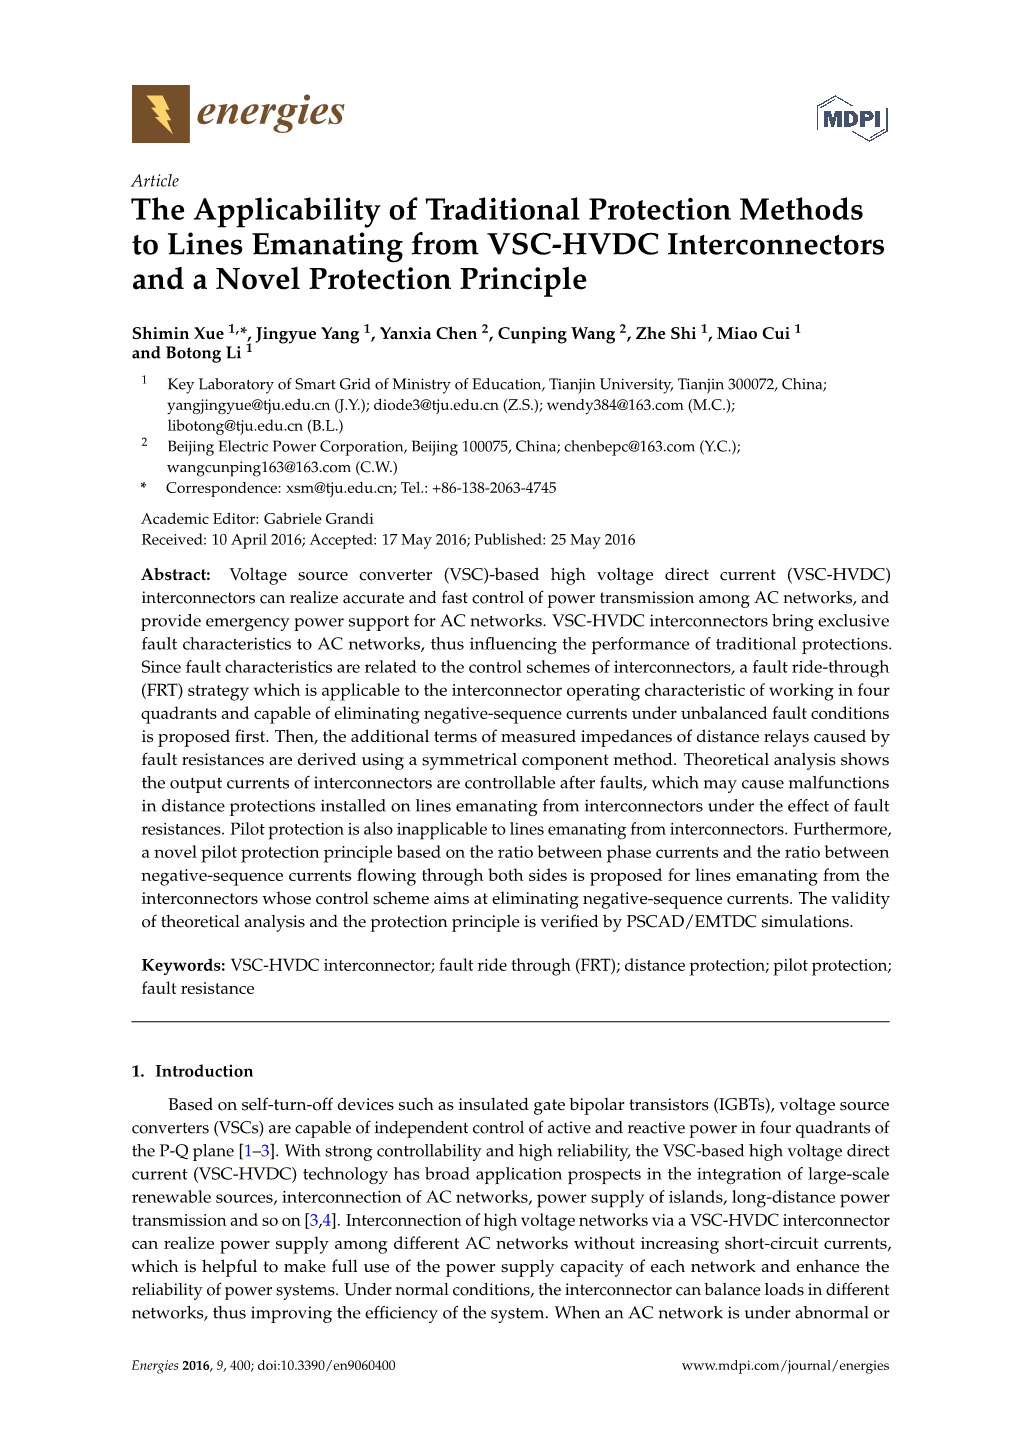 The Applicability of Traditional Protection Methods to Lines Emanating from VSC-HVDC Interconnectors and a Novel Protection Principle